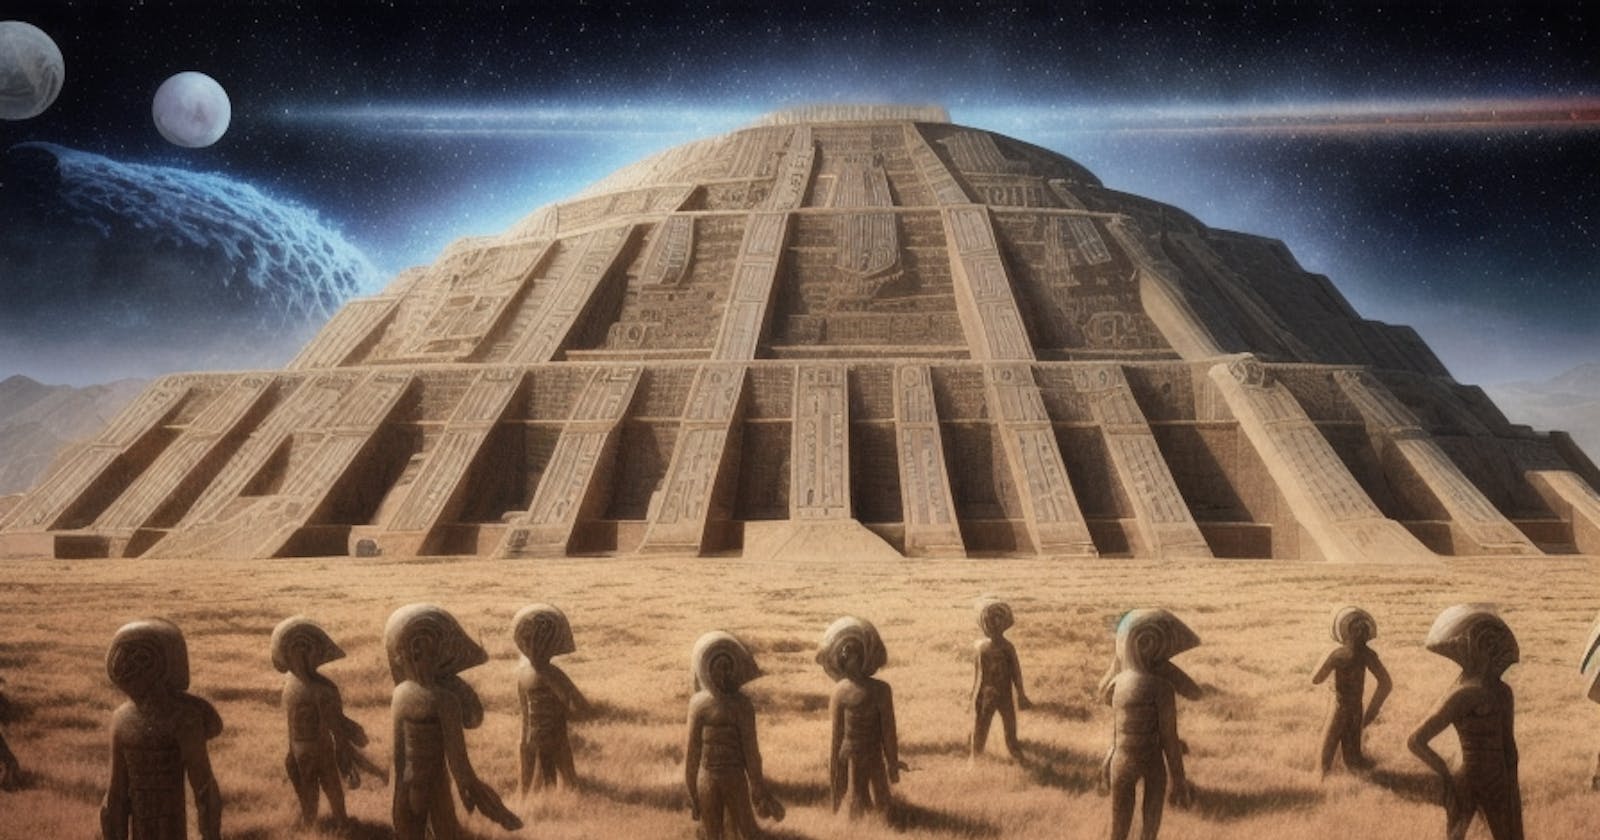 Beyond the Stars: Anunnaki, Extraterrestrials, and Earth's Ancient Past